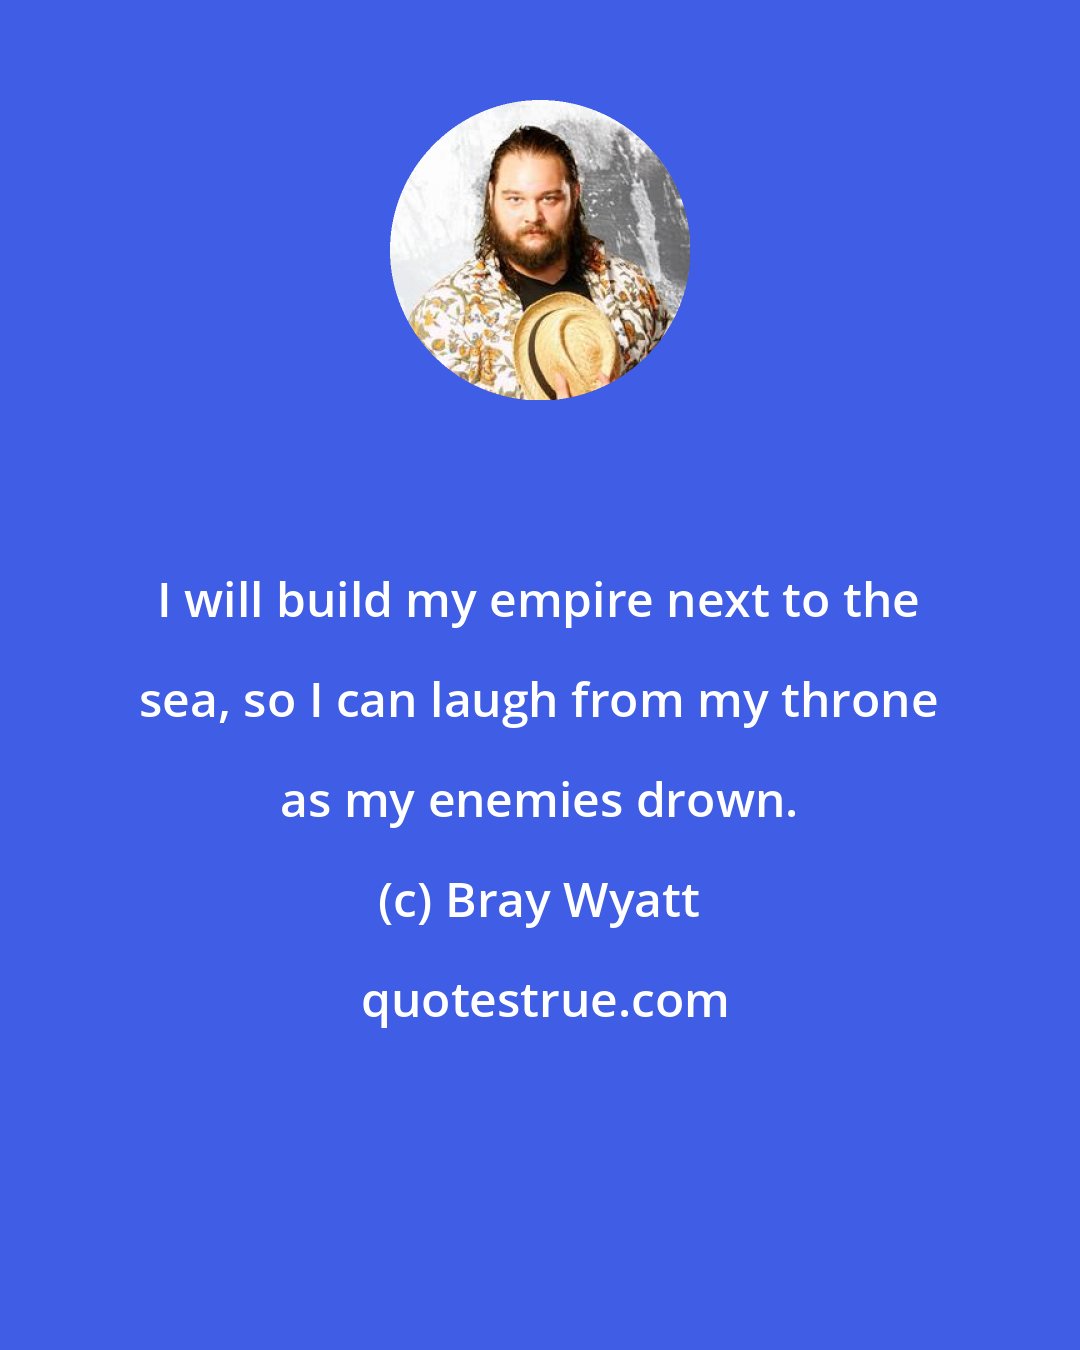 Bray Wyatt: I will build my empire next to the sea, so I can laugh from my throne as my enemies drown.